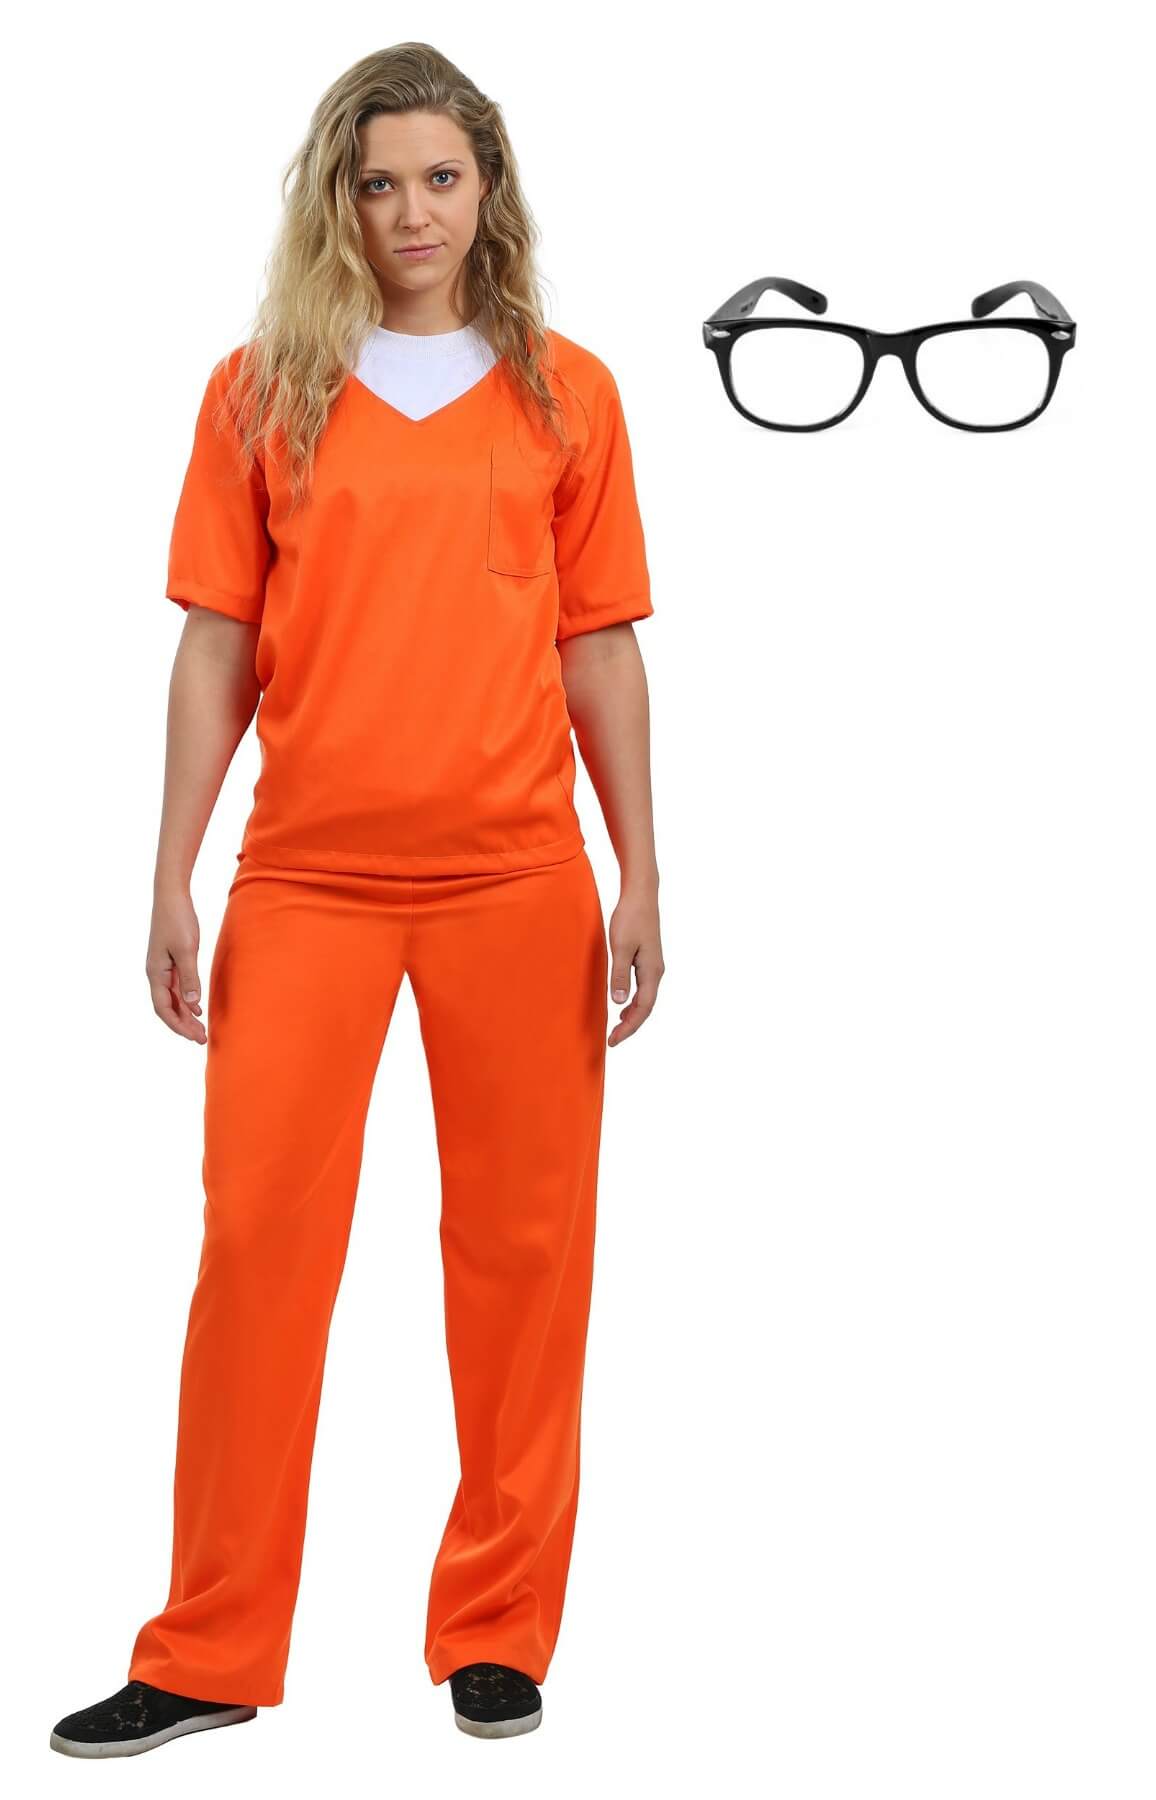 Orange Is the New Black Costumes: Piper and Alex